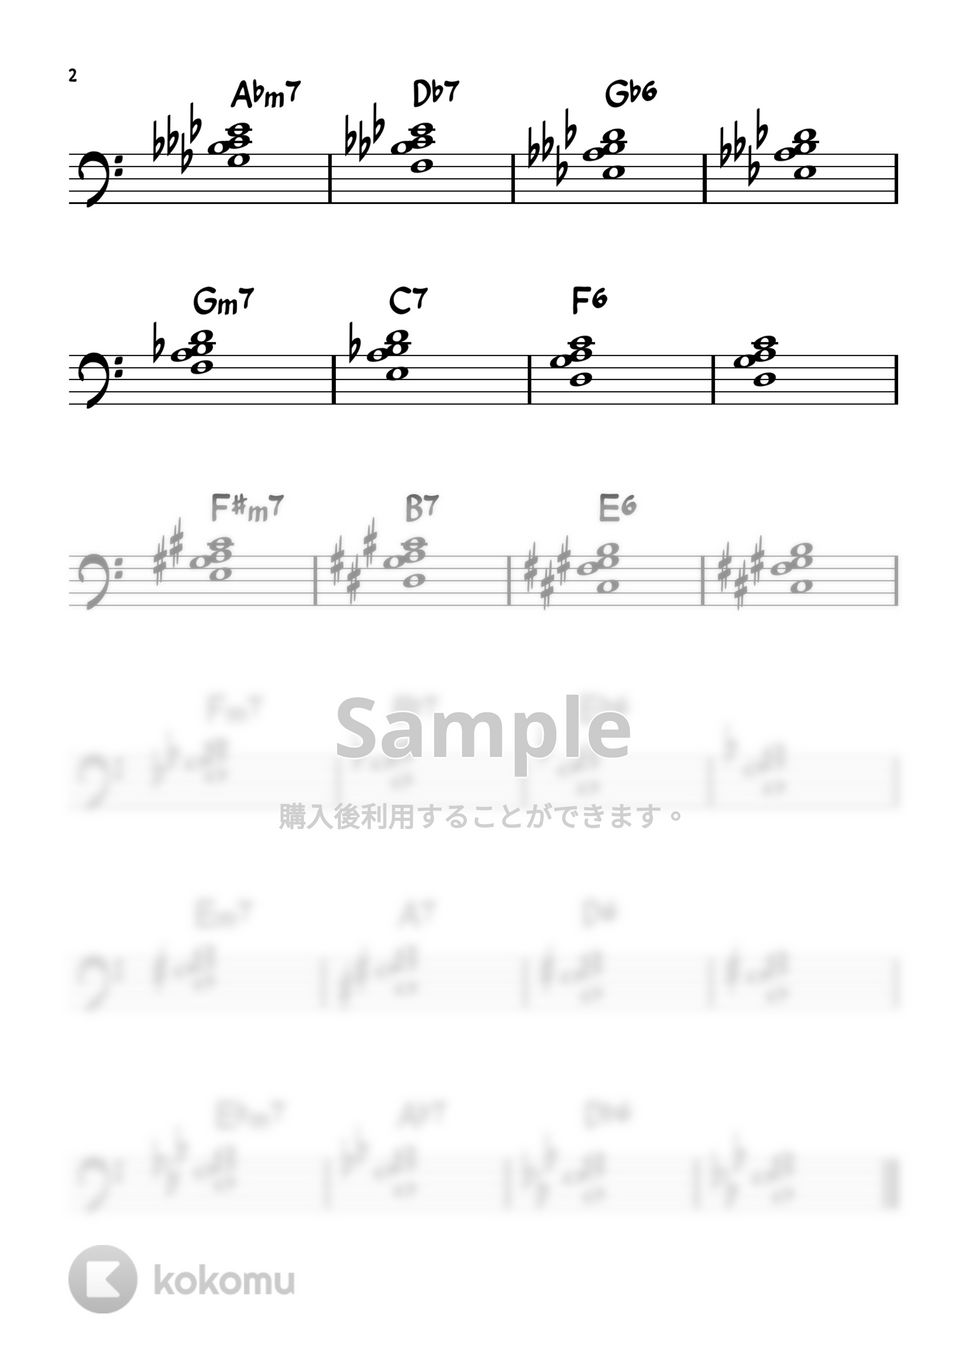 shimarinmarket - Major 2-5-1② 7935half tone↓exercise (for the left hand practice)